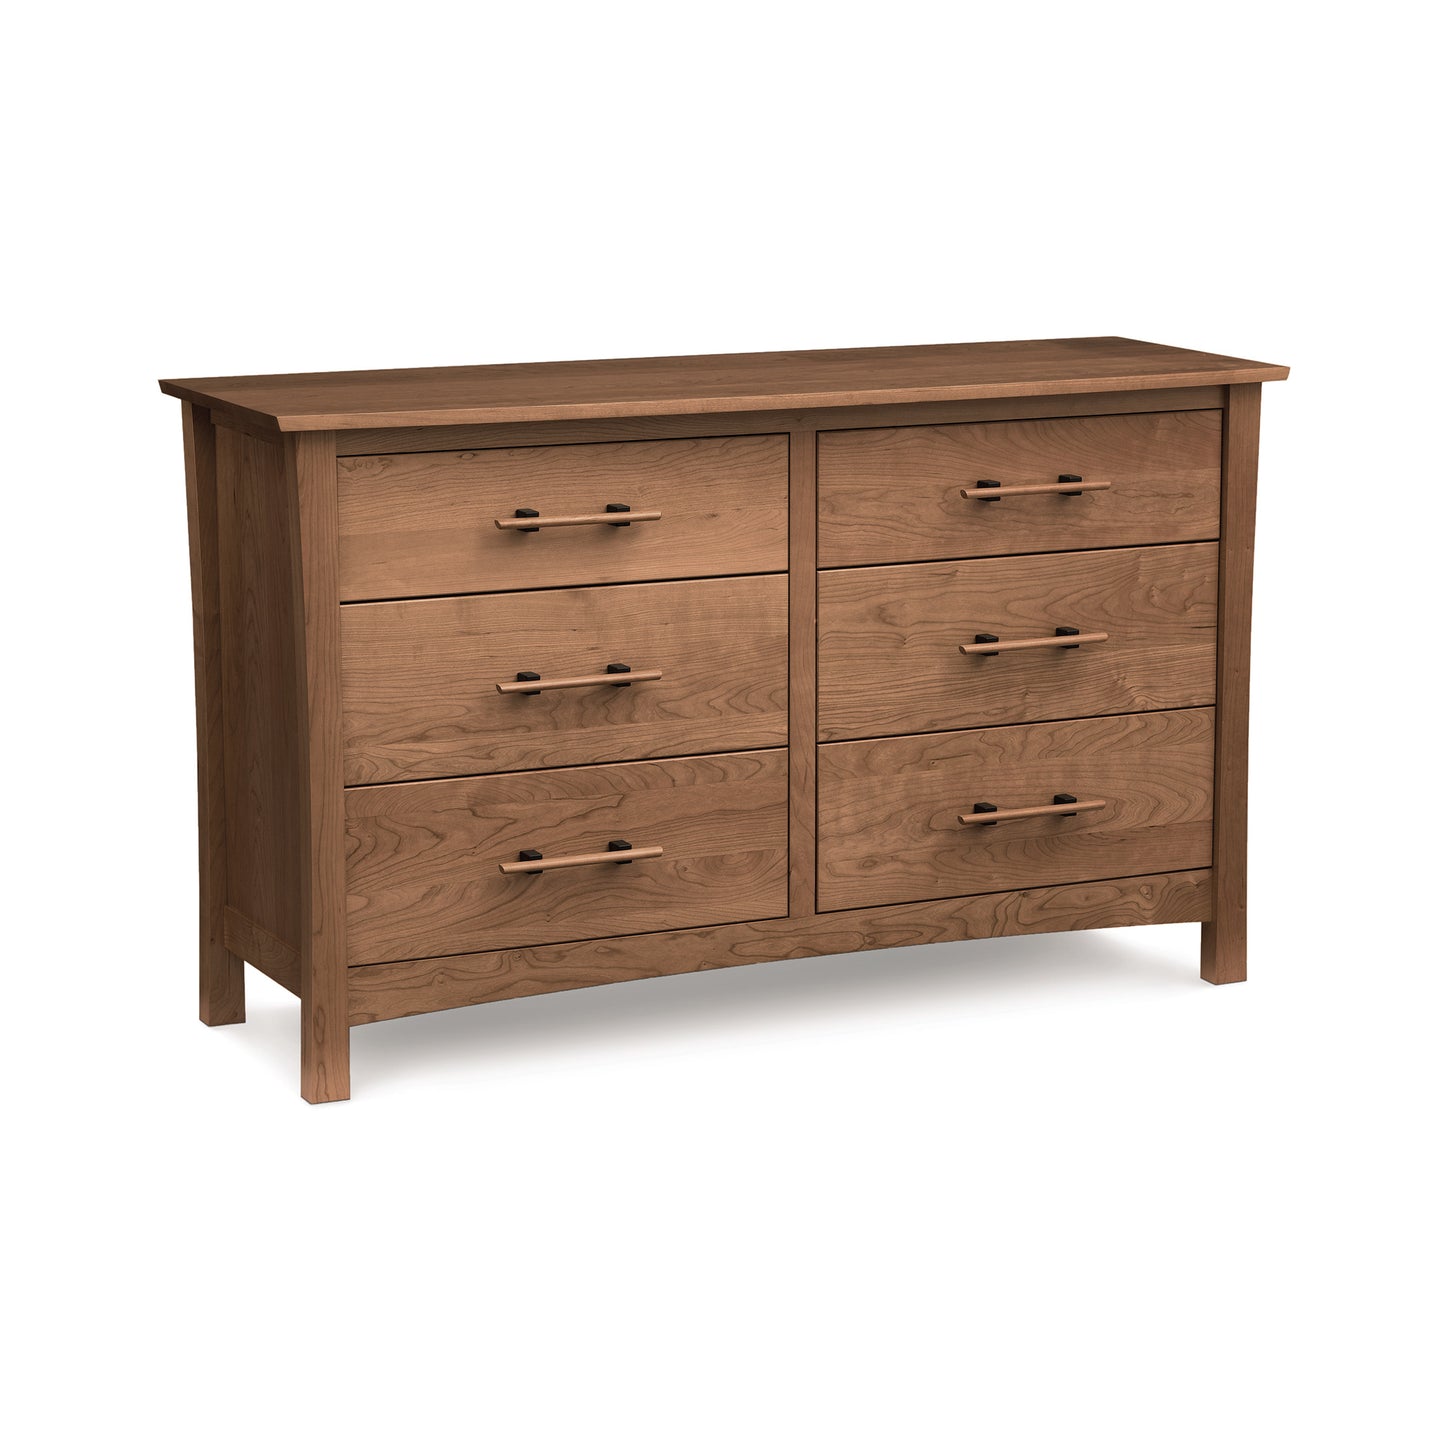 A Monterey 6-Drawer Dresser by Copeland Furniture with a simple design and metal handles, isolated on a white background.